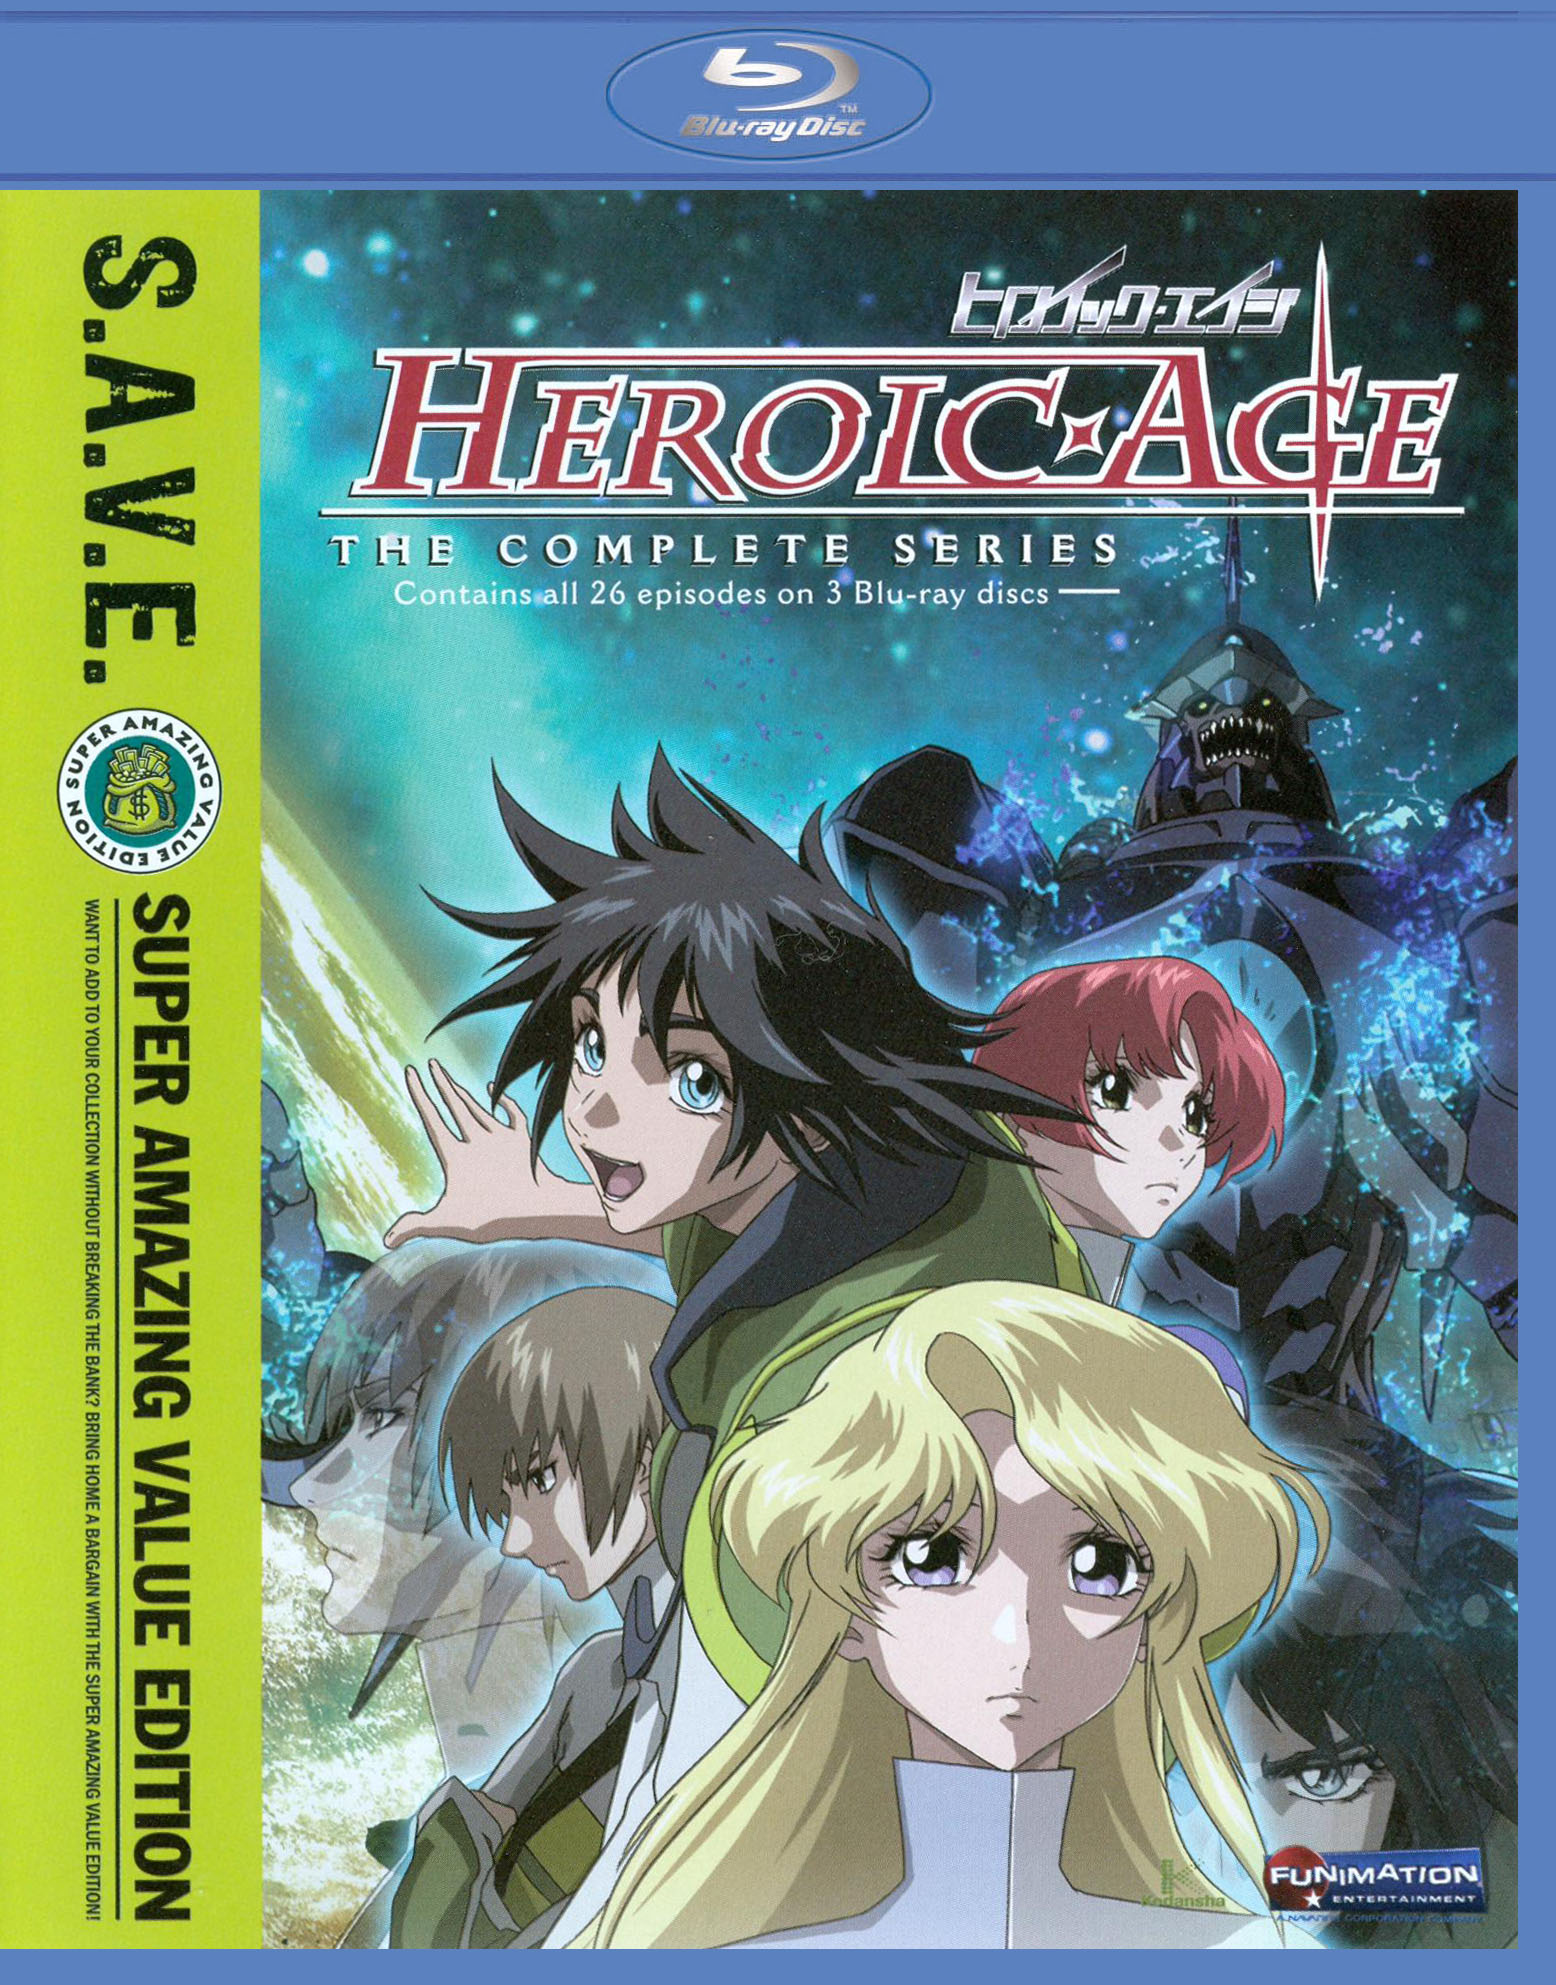 Heroic Age complete series / NEW anime on Blu-ray from FUNimation